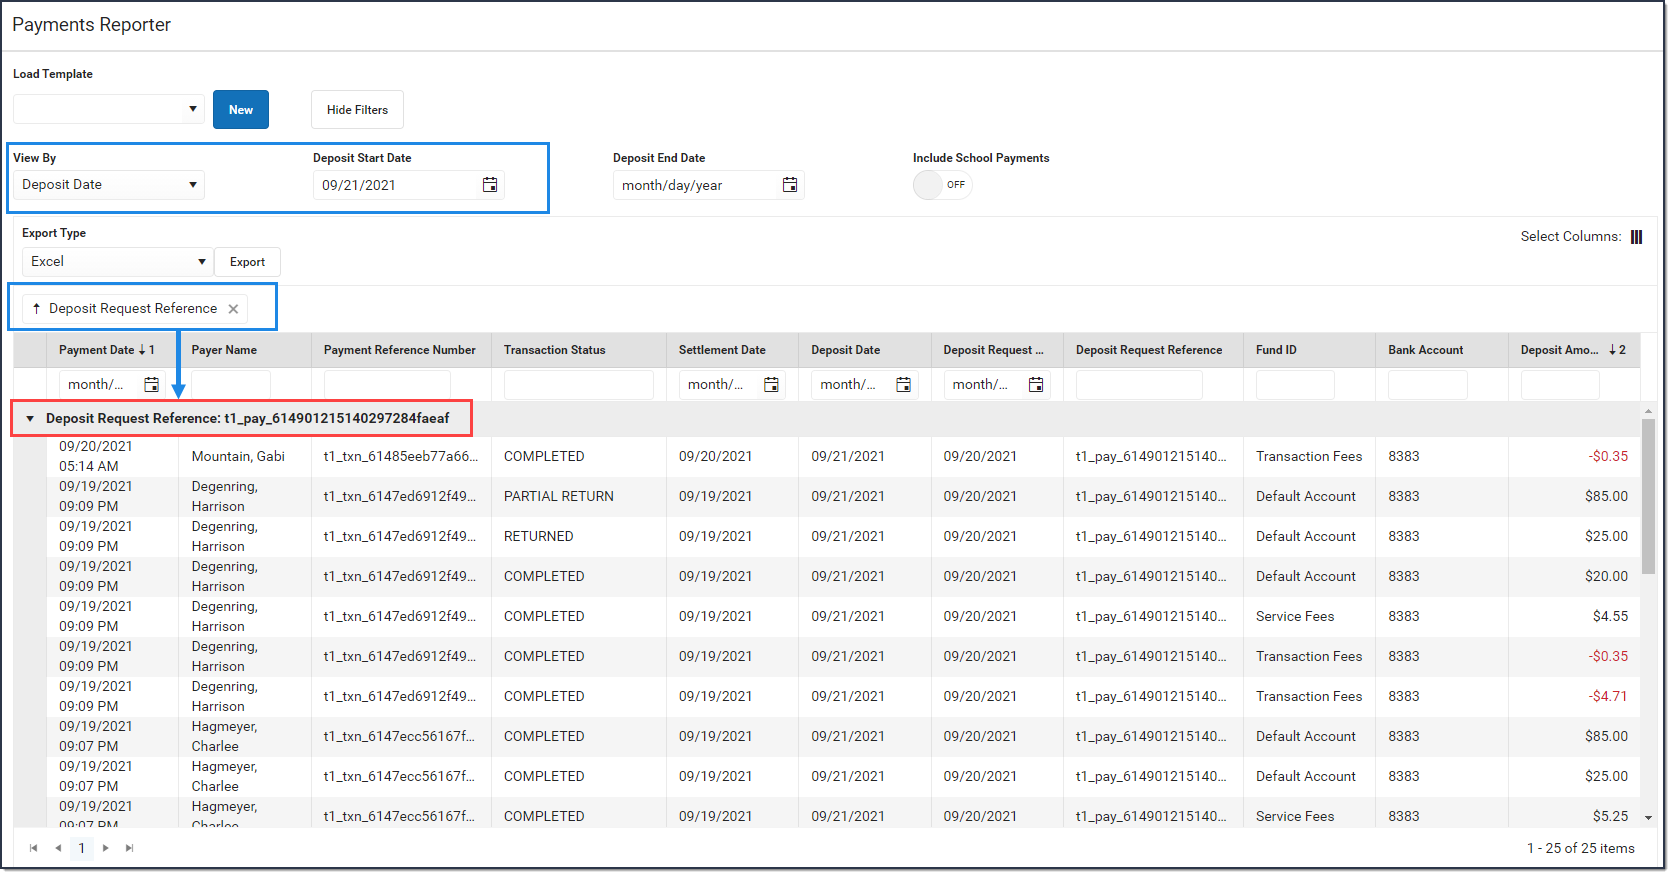 Screenshot of options used in the Payments Reporter to group deposits by Deposit Request Reference number.